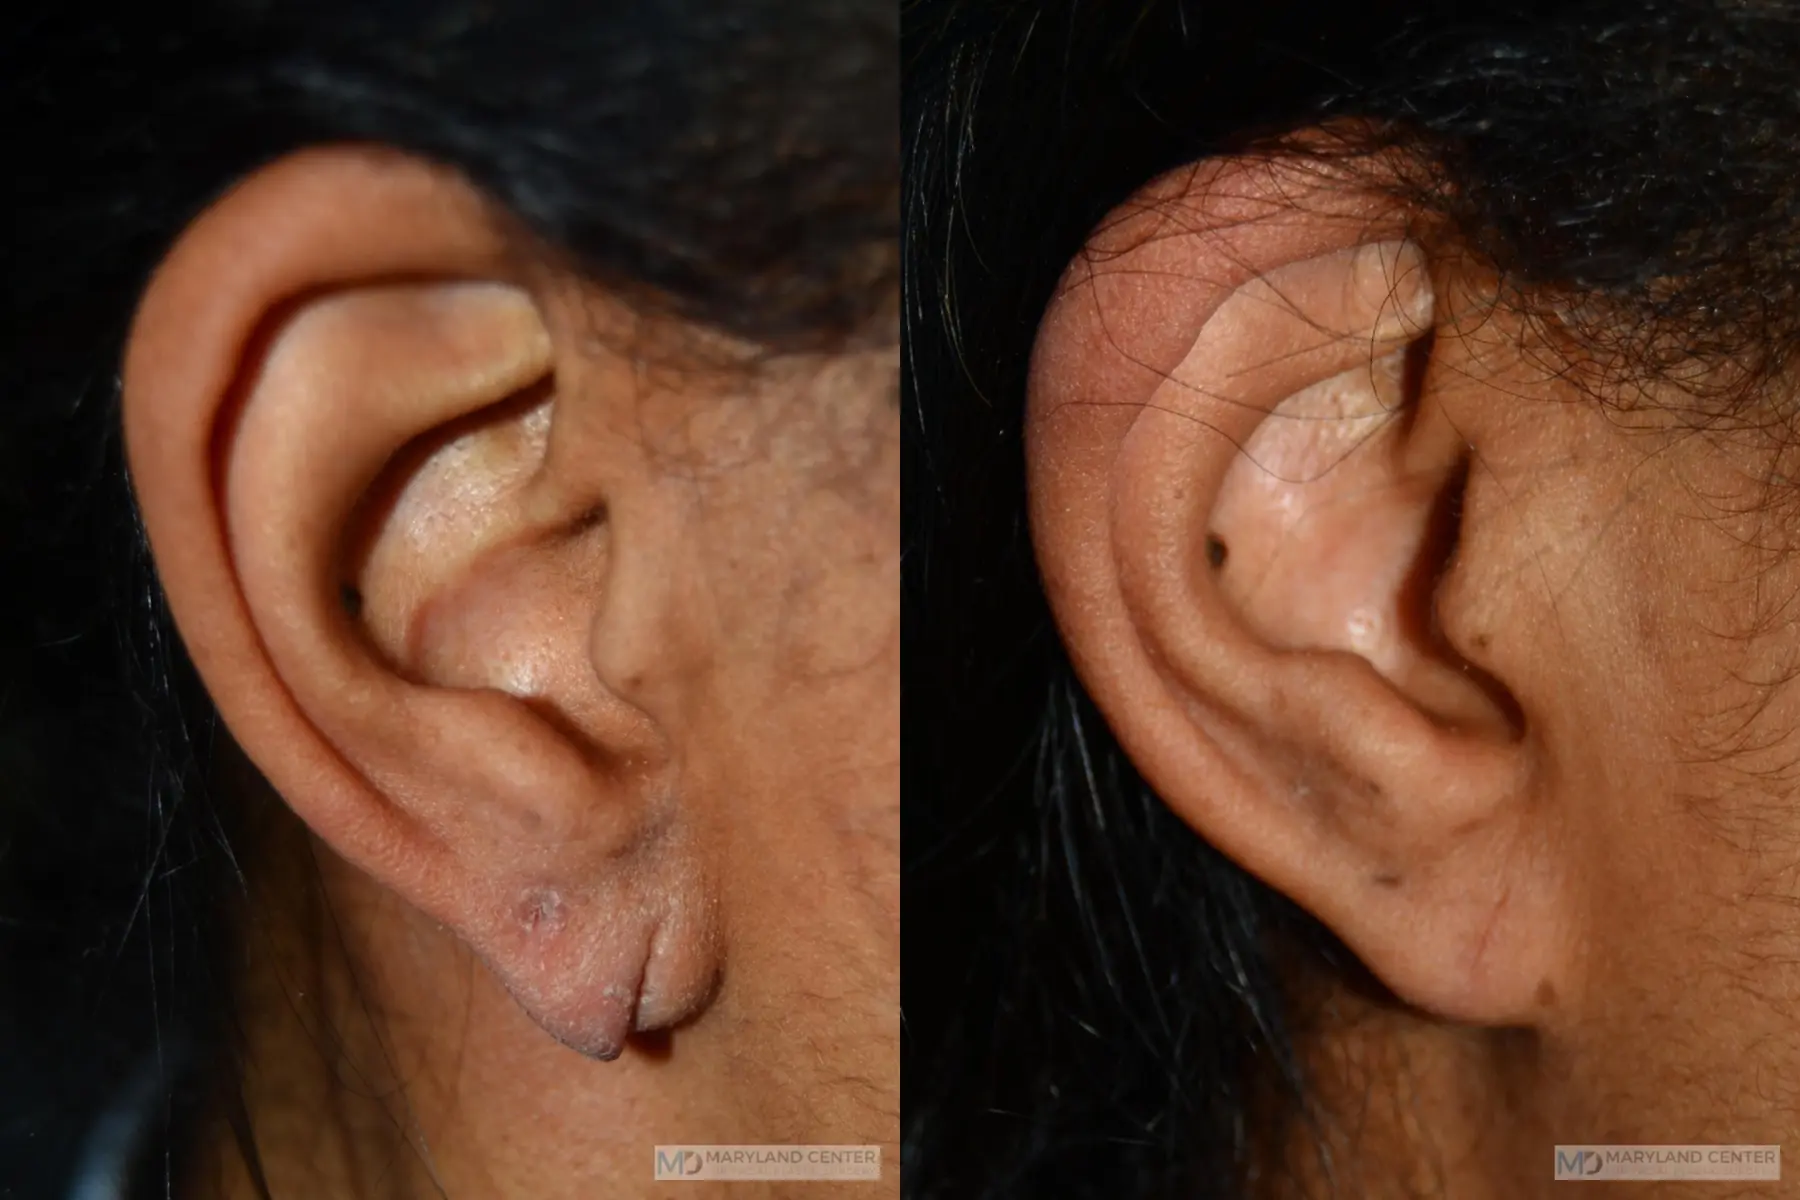 Earlobe Repair: Restore Your Ears with Dr. Lopes - Cosmetic